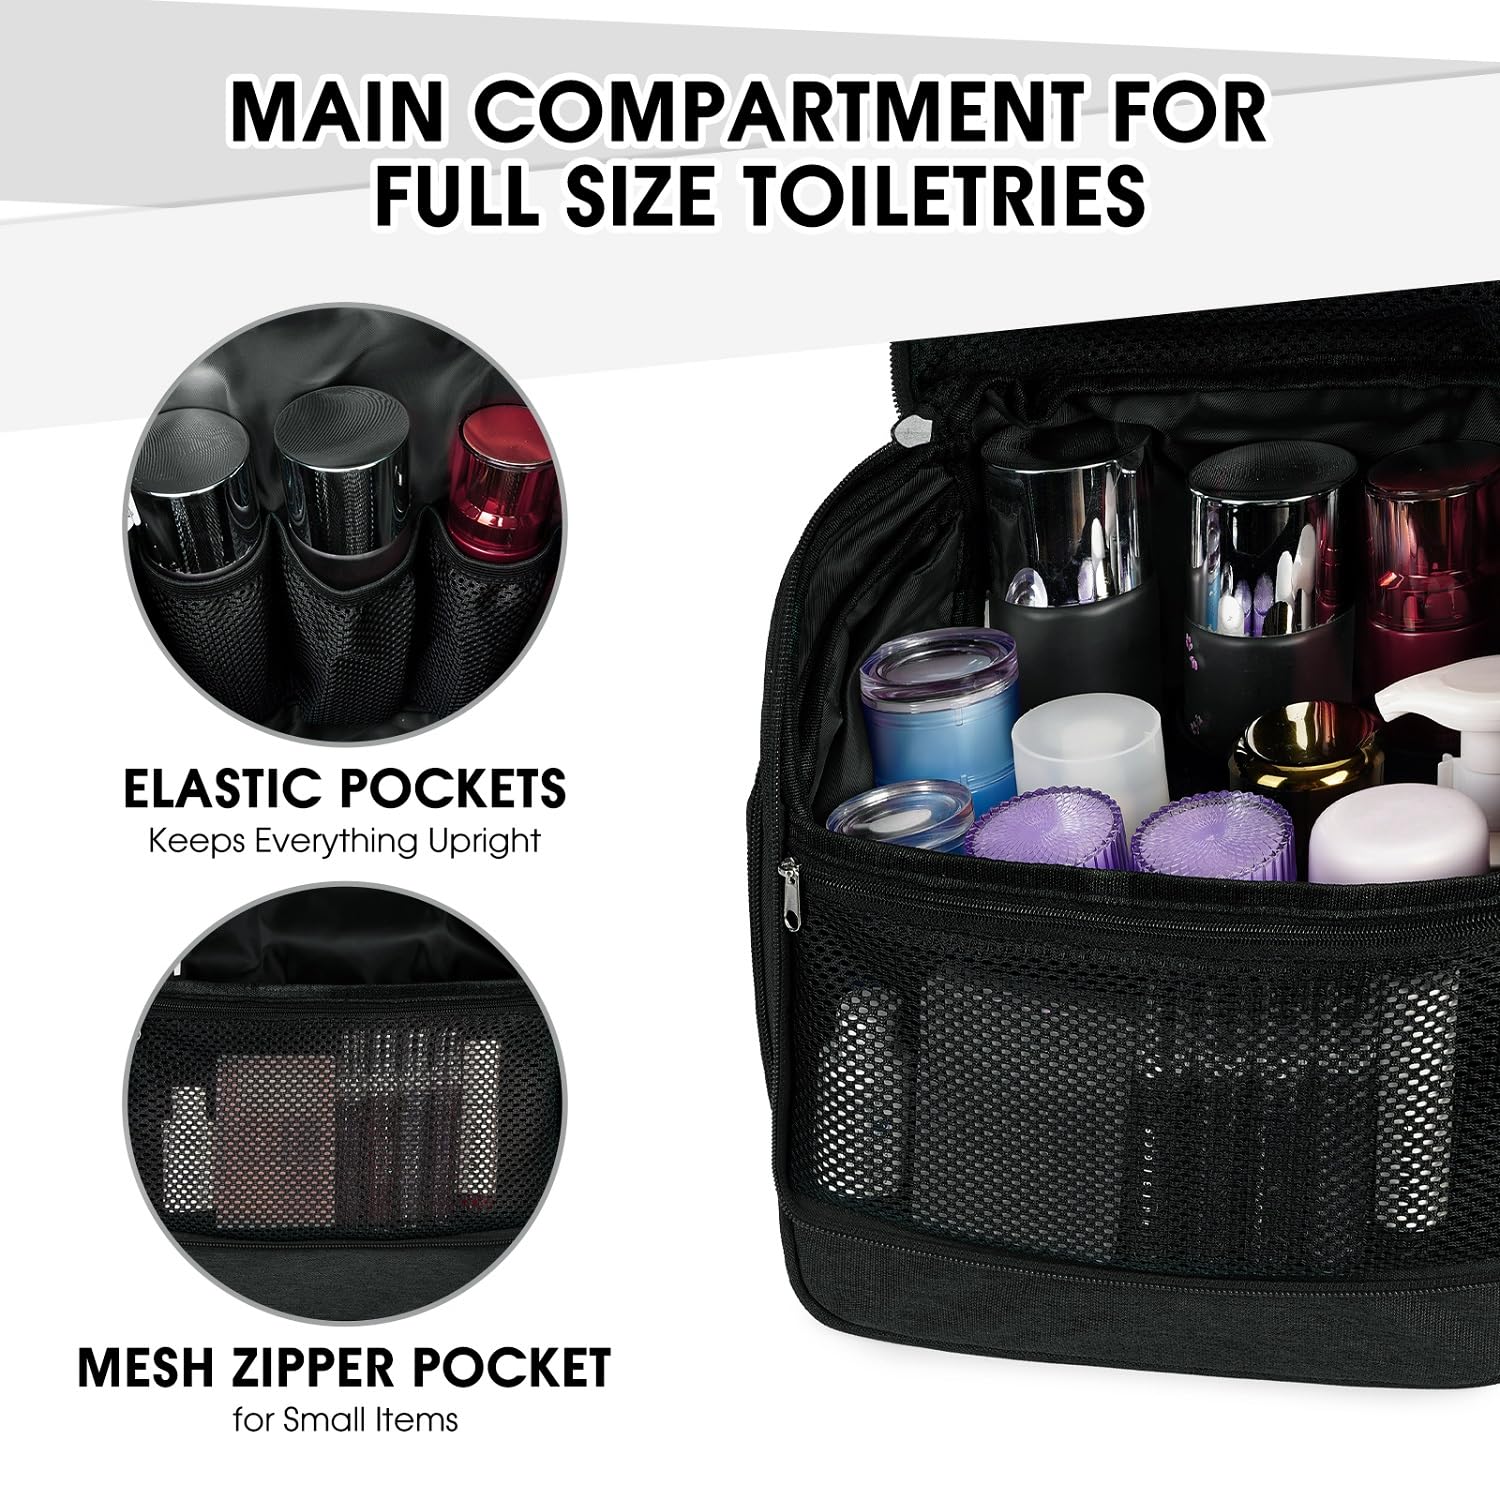 Hanging Travel Toiletry Bag Waterproof Makeup Cosmetic Small Travel Bag For  Women Bathroom And Shower Organizer Kit With Sturdy Hook For Toiletries